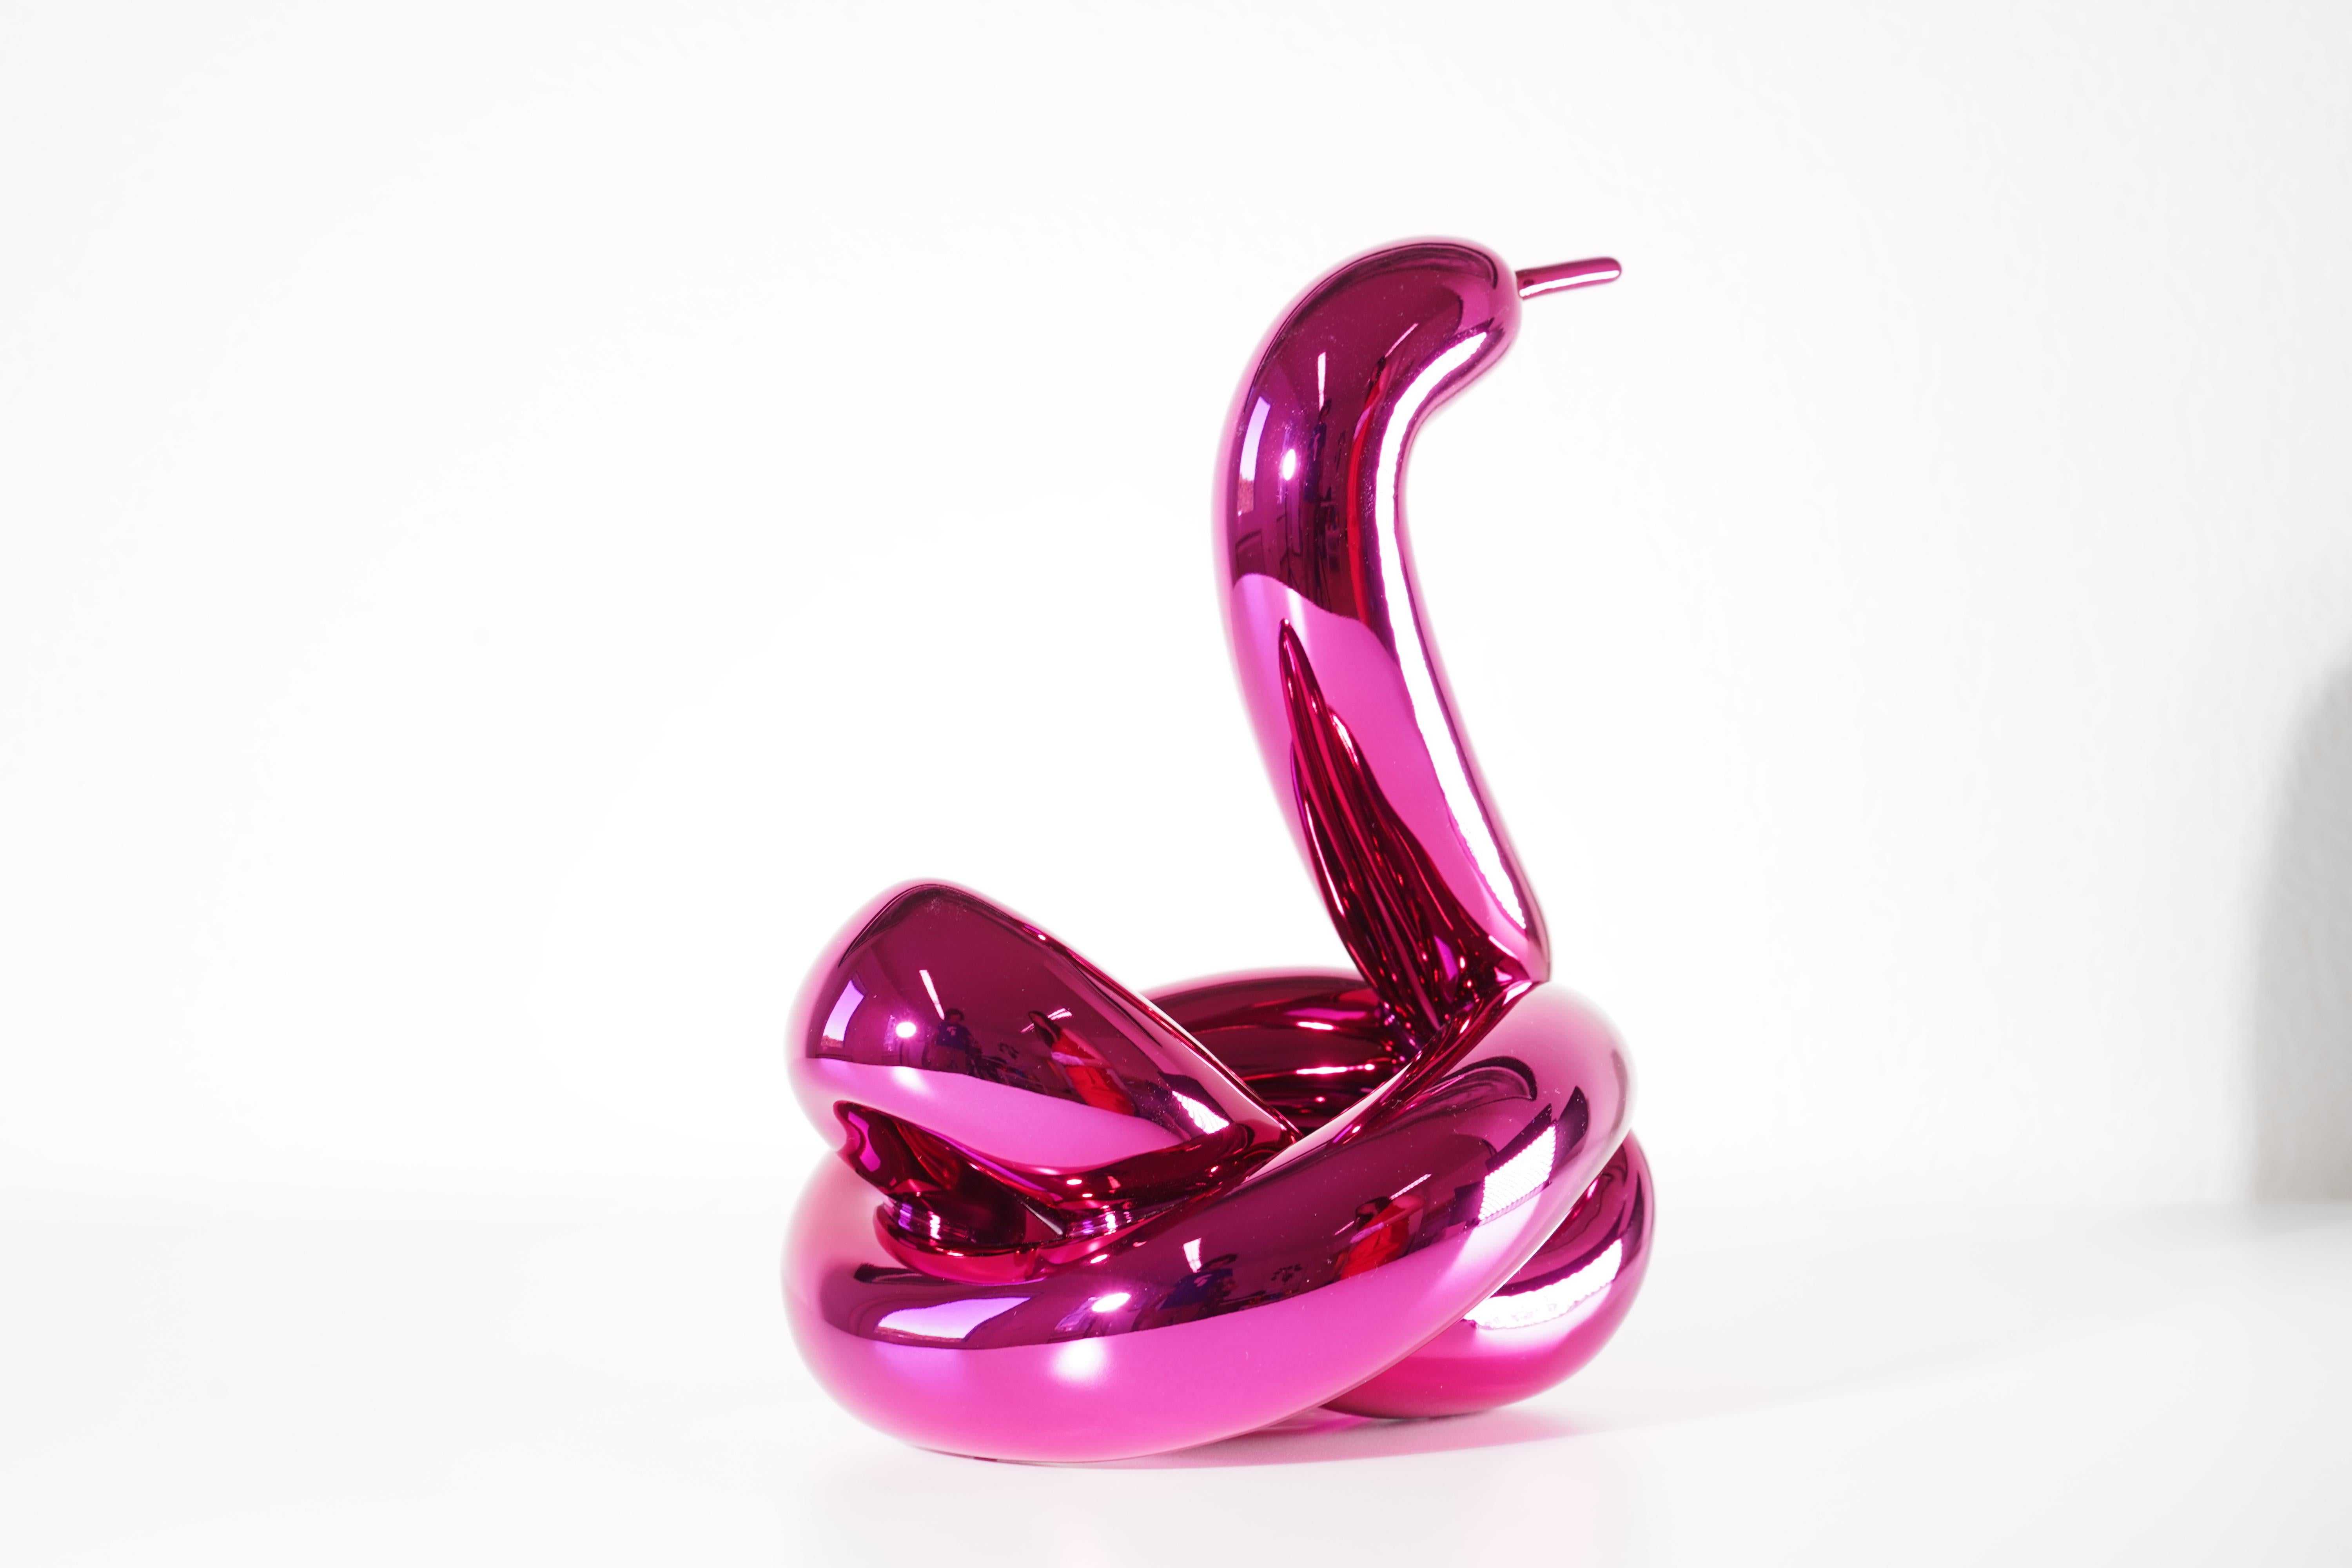 Balloon Swan (Magenta) - Jeff Koons, 21st Century, Contemporary, Porcelain, Sculpture, Decor, Limited Edition

Limoges porcelain with chromatic metalized coating
Edition of 999
Signed and numbered
In mint condition, as acquired from the